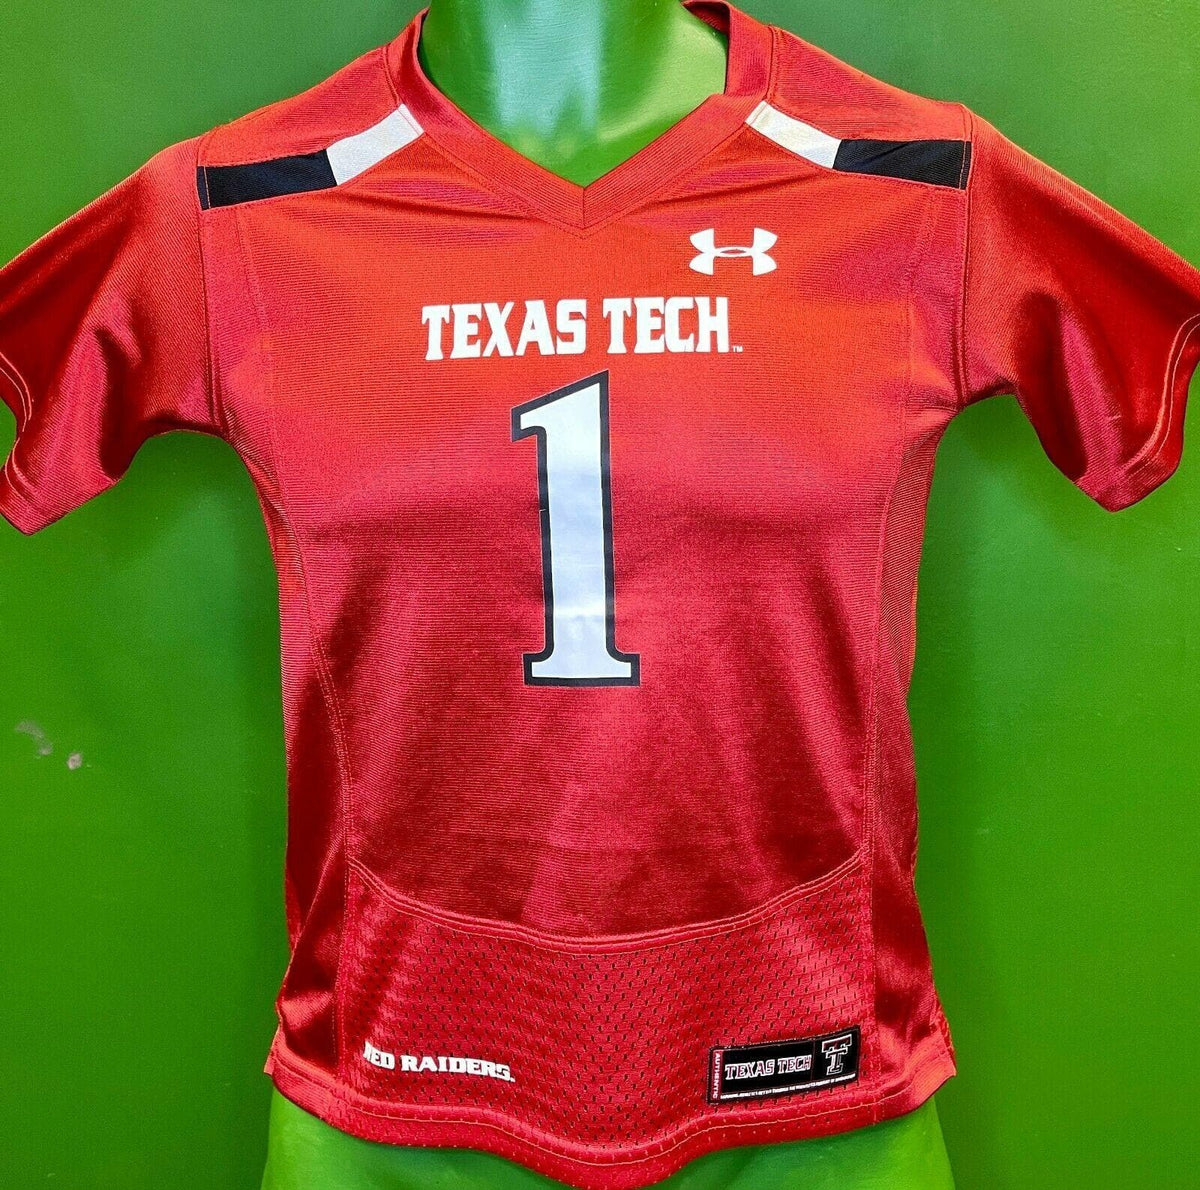 NCAA Texas Tech Red Raiders #1 Under Armour Jersey Youth Small 7